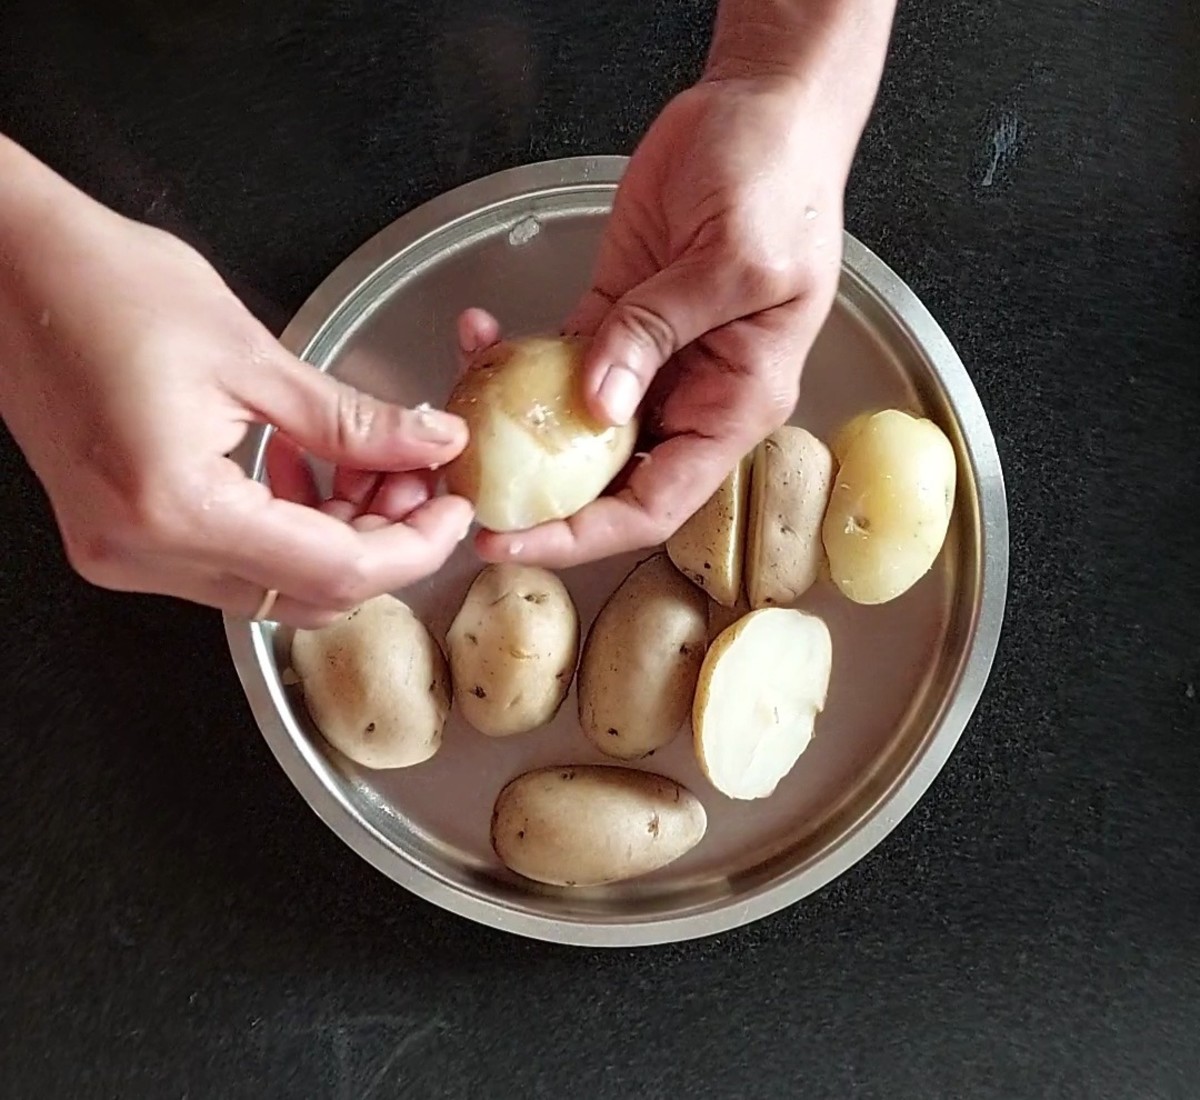 Once the pressure releases, open the cooker and transfer the cooked potatoes to a plate. Let them cool down. After cooling, peel off the skin.